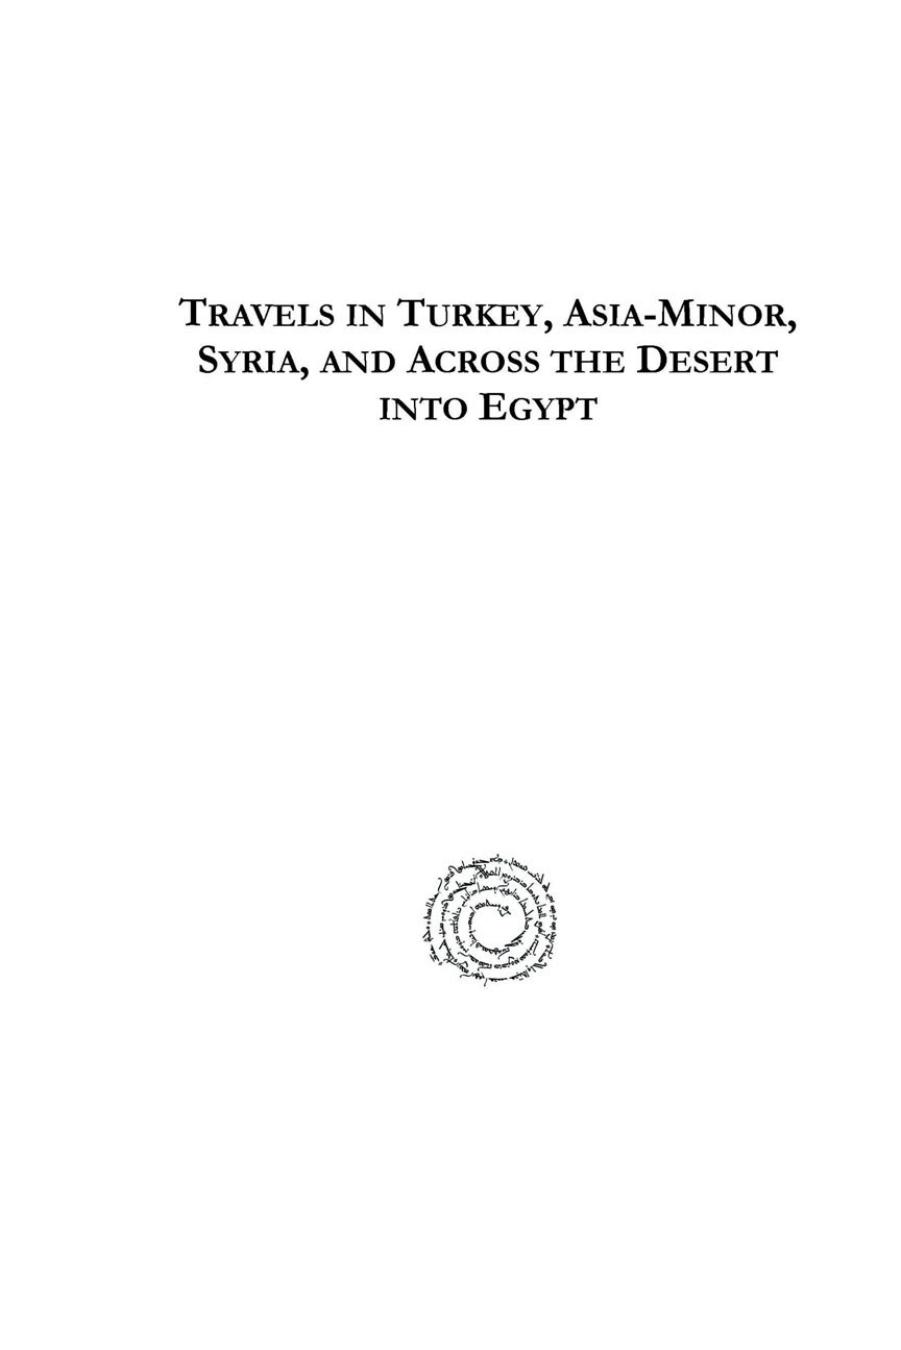 Travels in Turkey, Asia-Minor, Syria, and Across the Desert Into Egypt by William Wittman